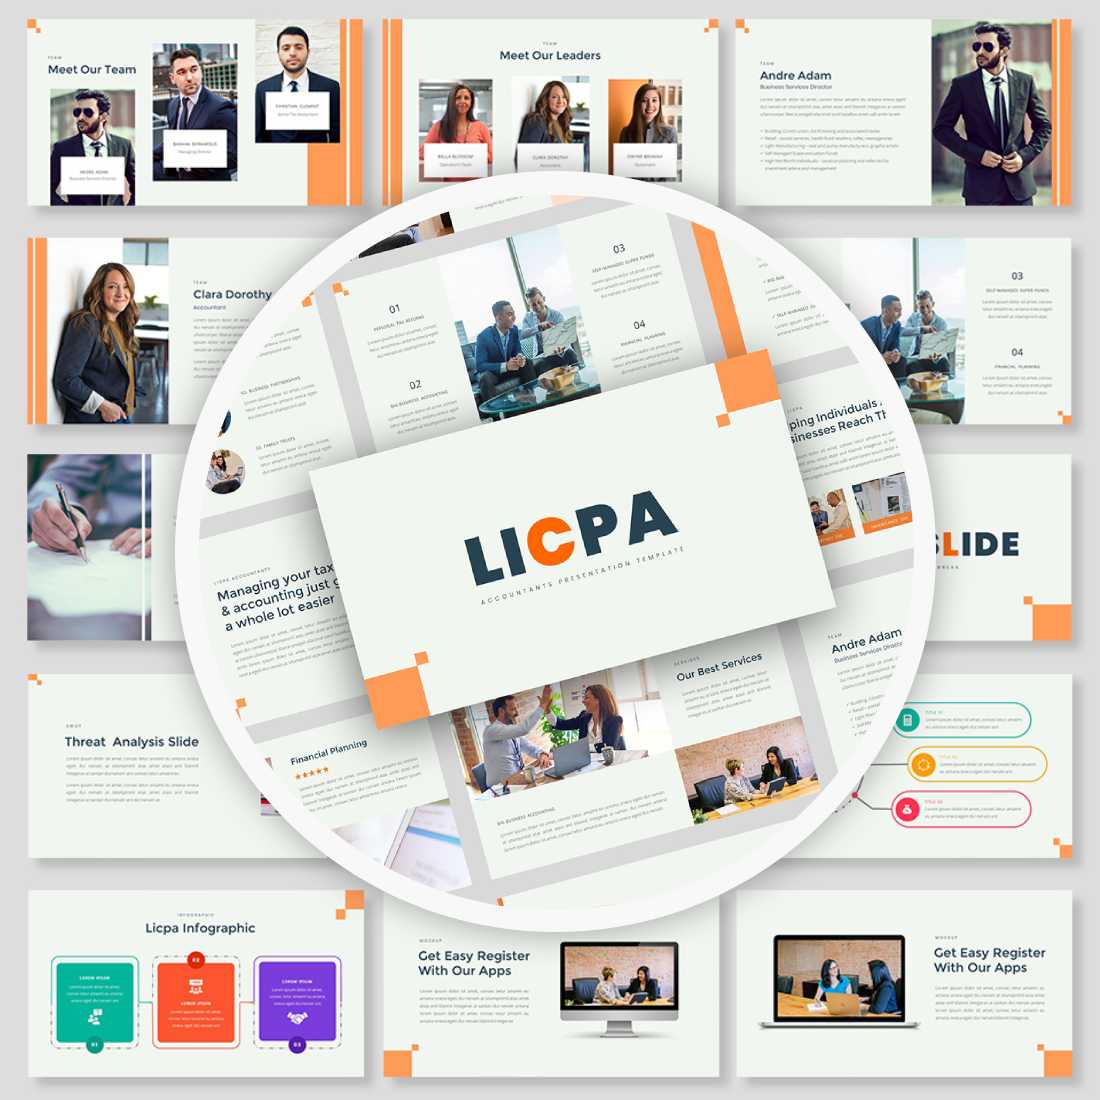 Licpa - Accountants Presentation PowerPoint Template cover image.